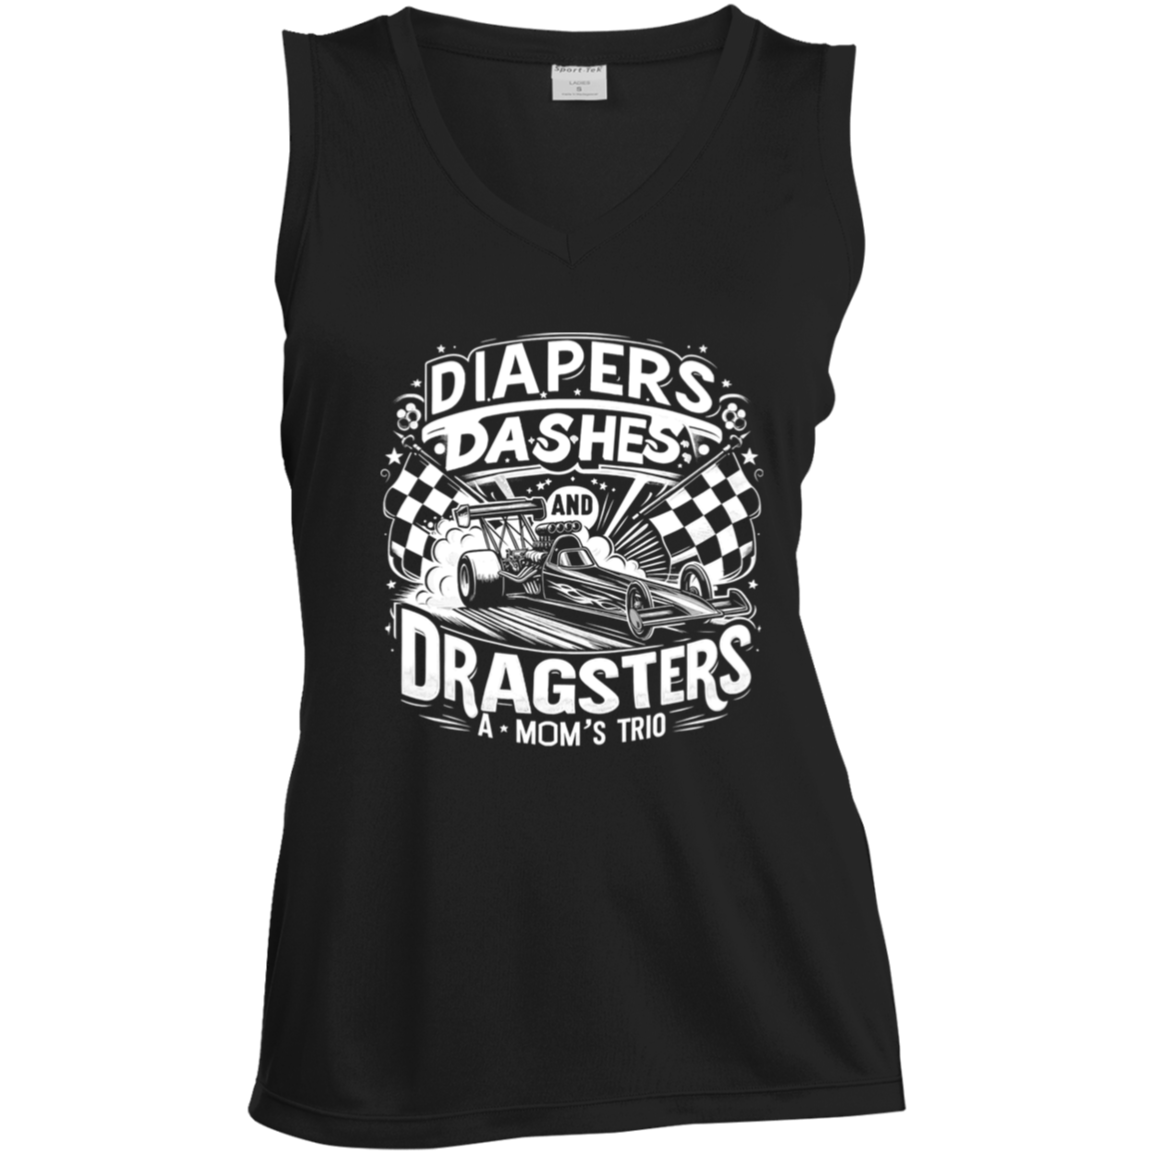 Diapers Dashes And Dragsters A Mom's Trio Tank Tops